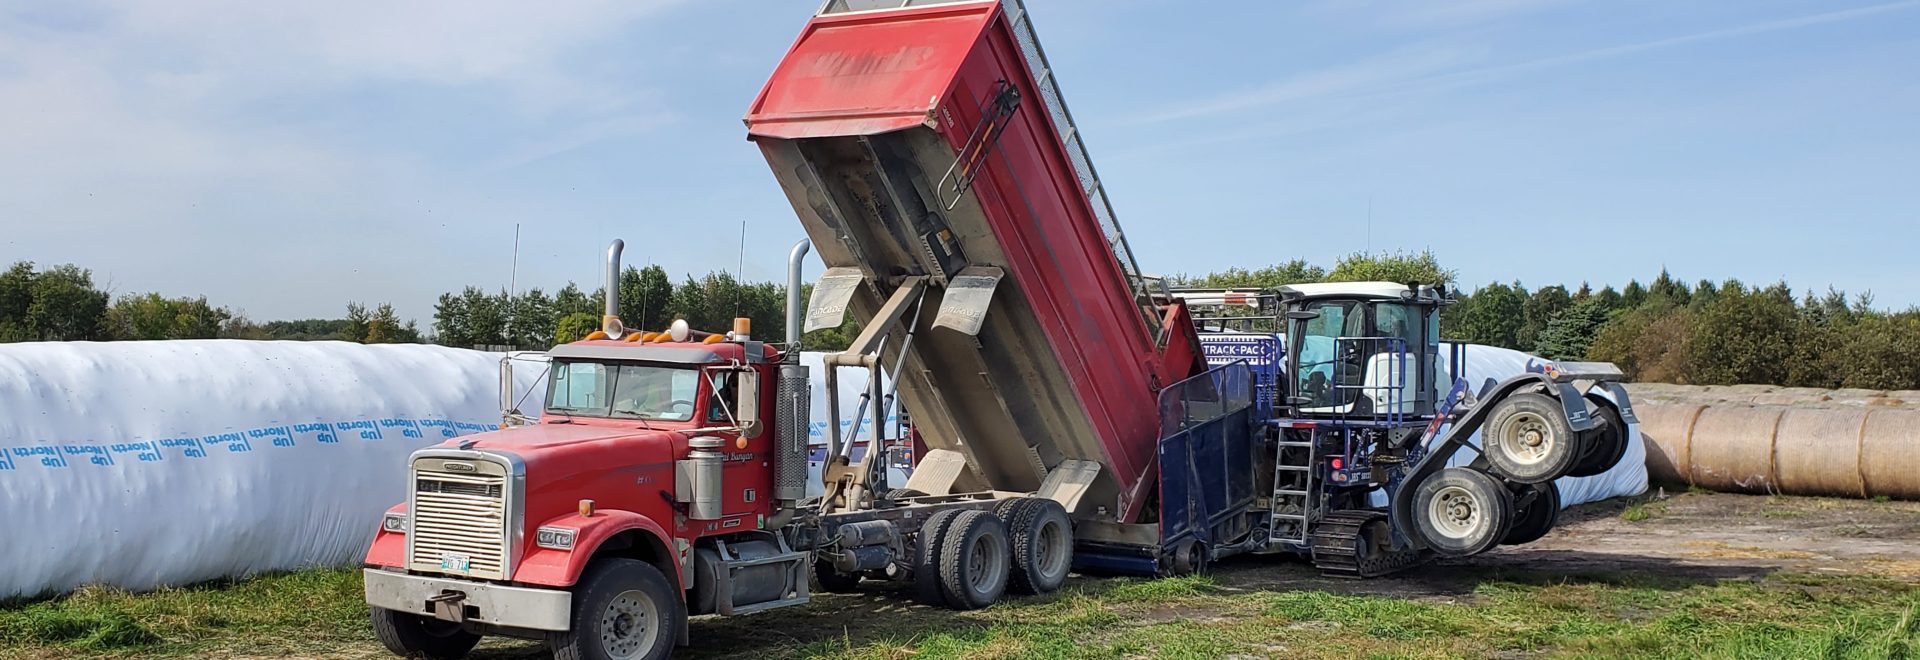 Truck unloading into bagger